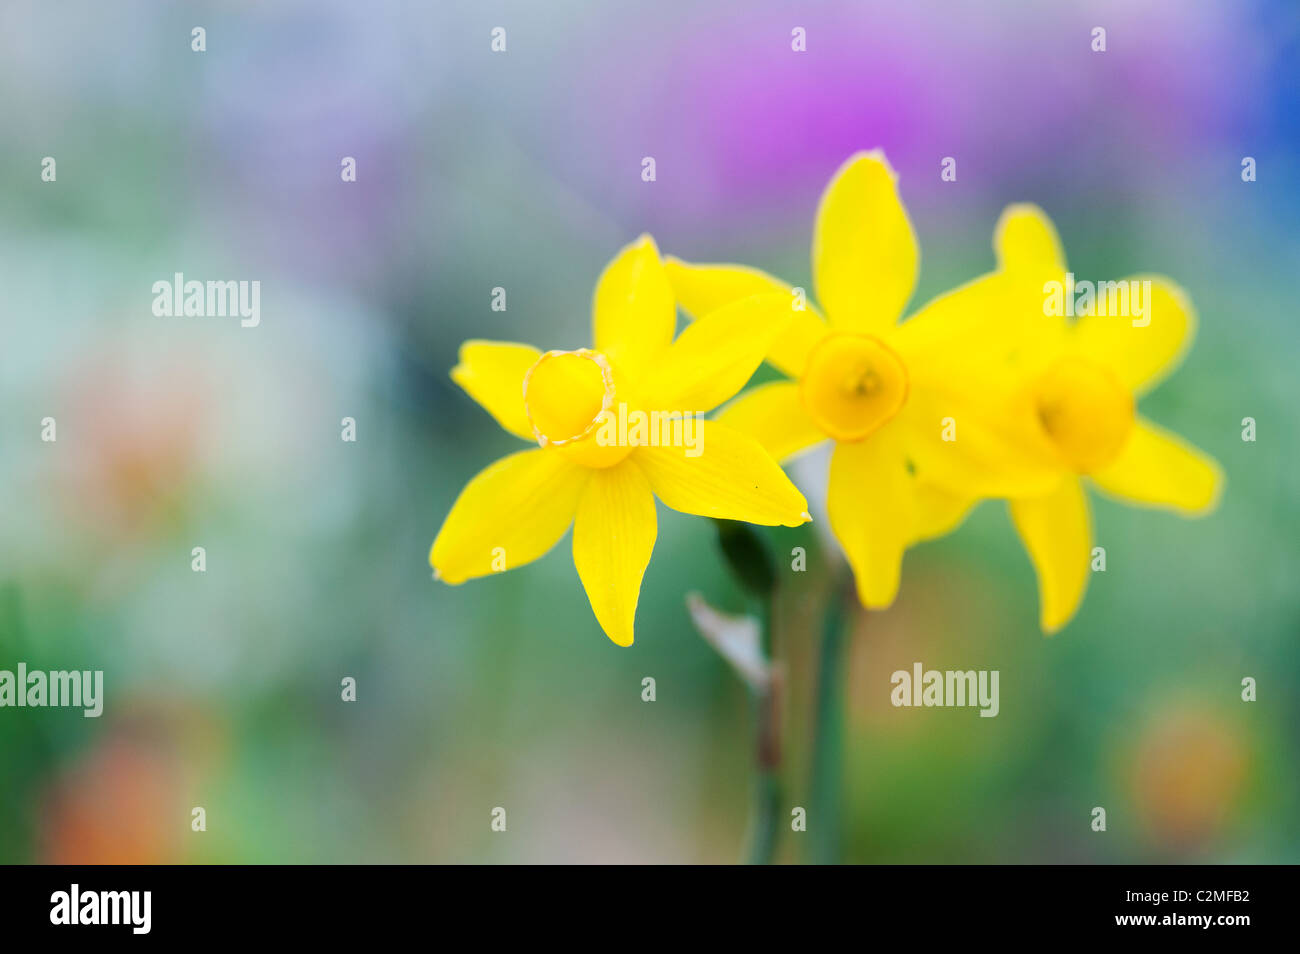 Narcissus assoanus. Miniature daffodil flowers. Abstract Stock Photo